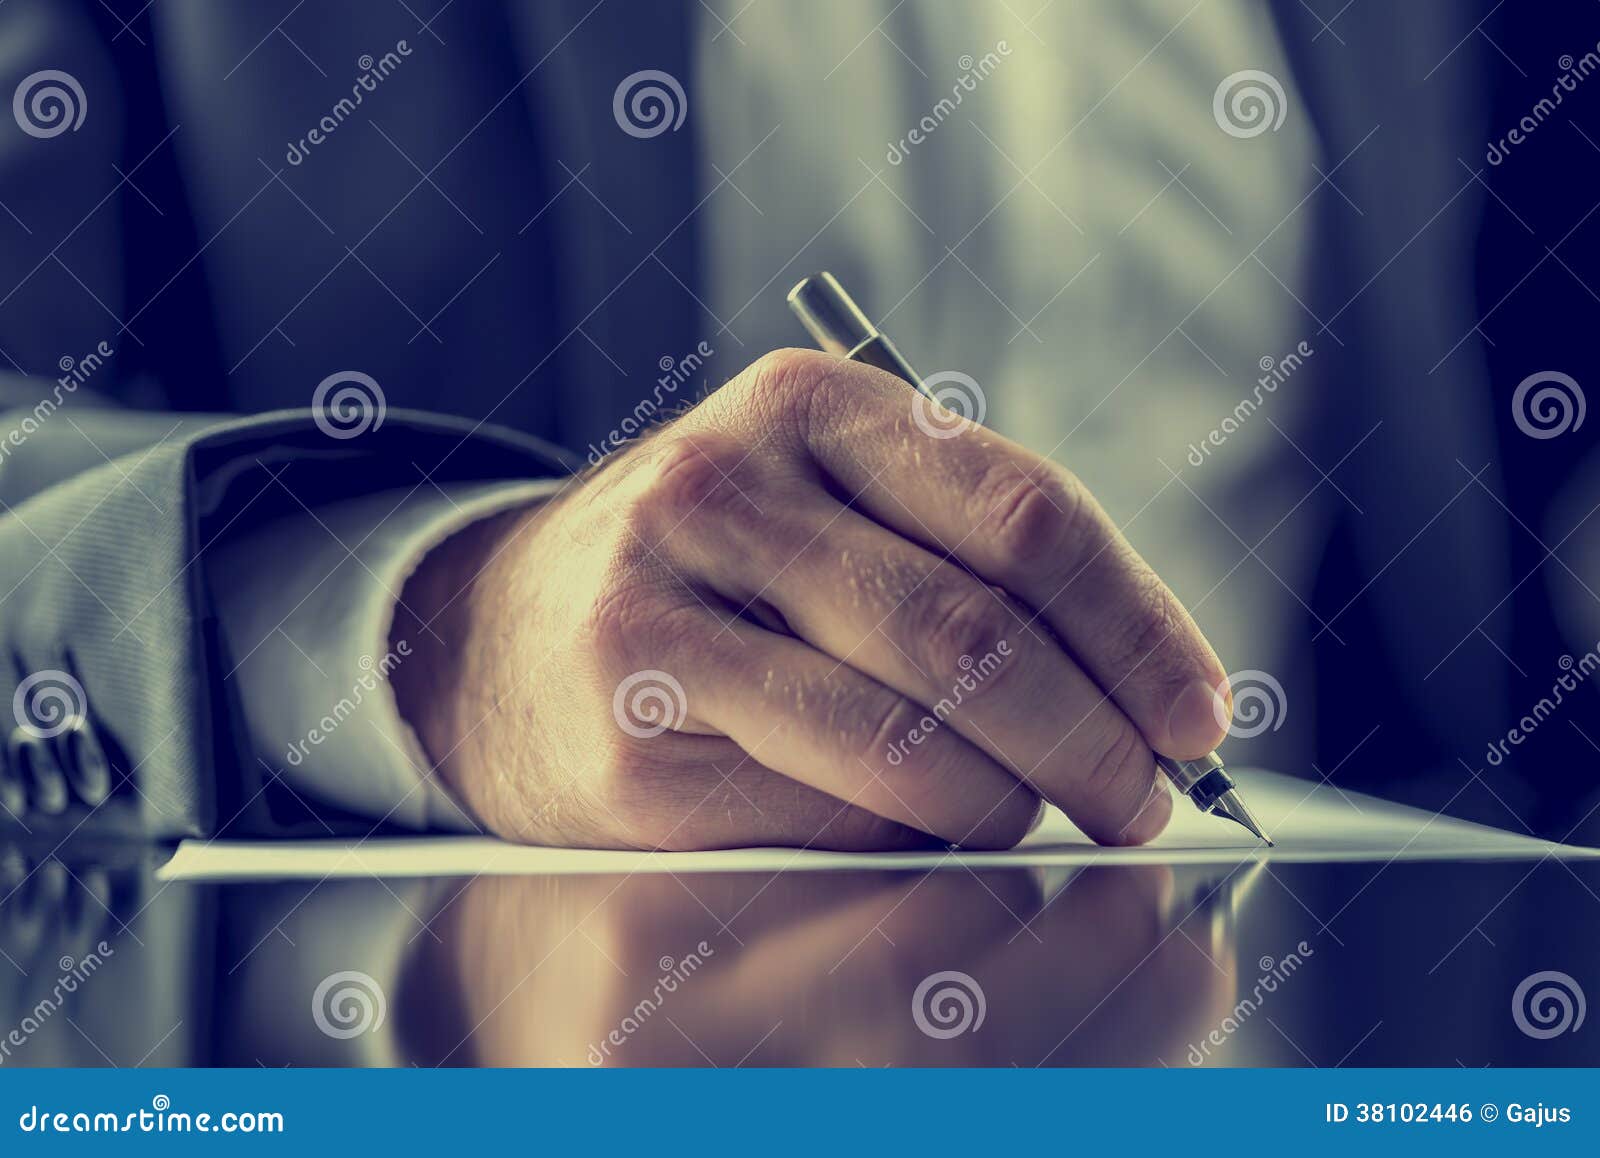 man signing a document or writing correspondence